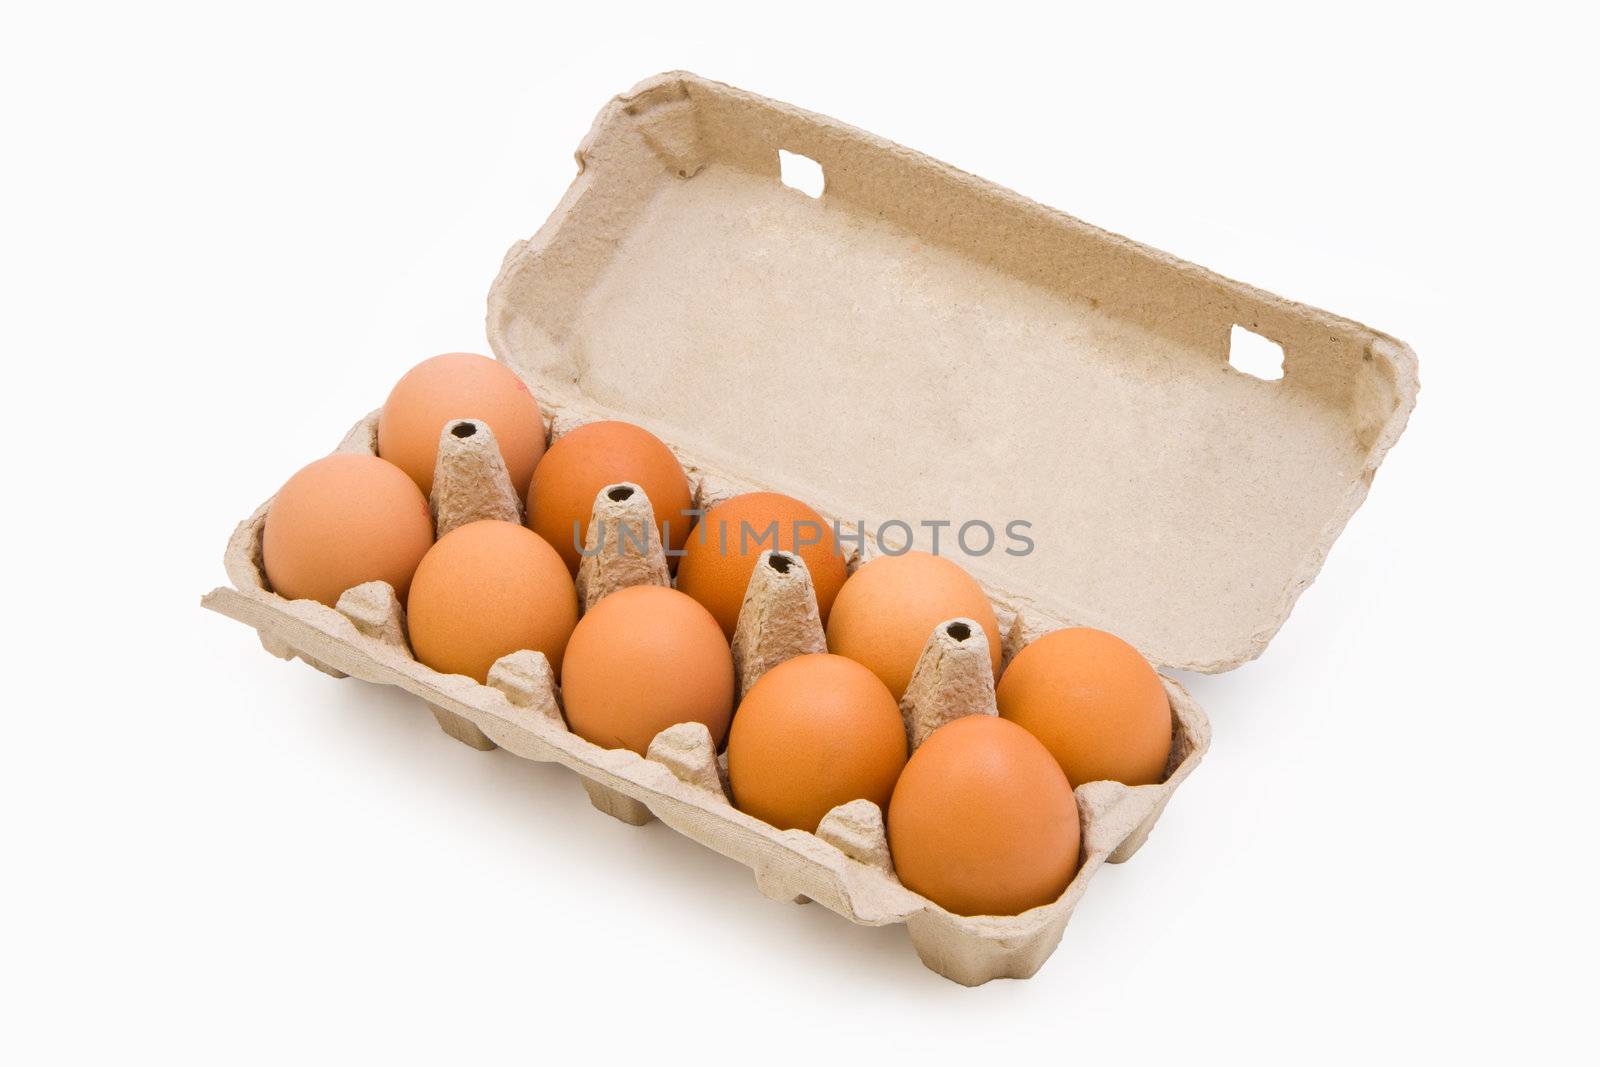 Chicken eggs in a carton box isolated on white